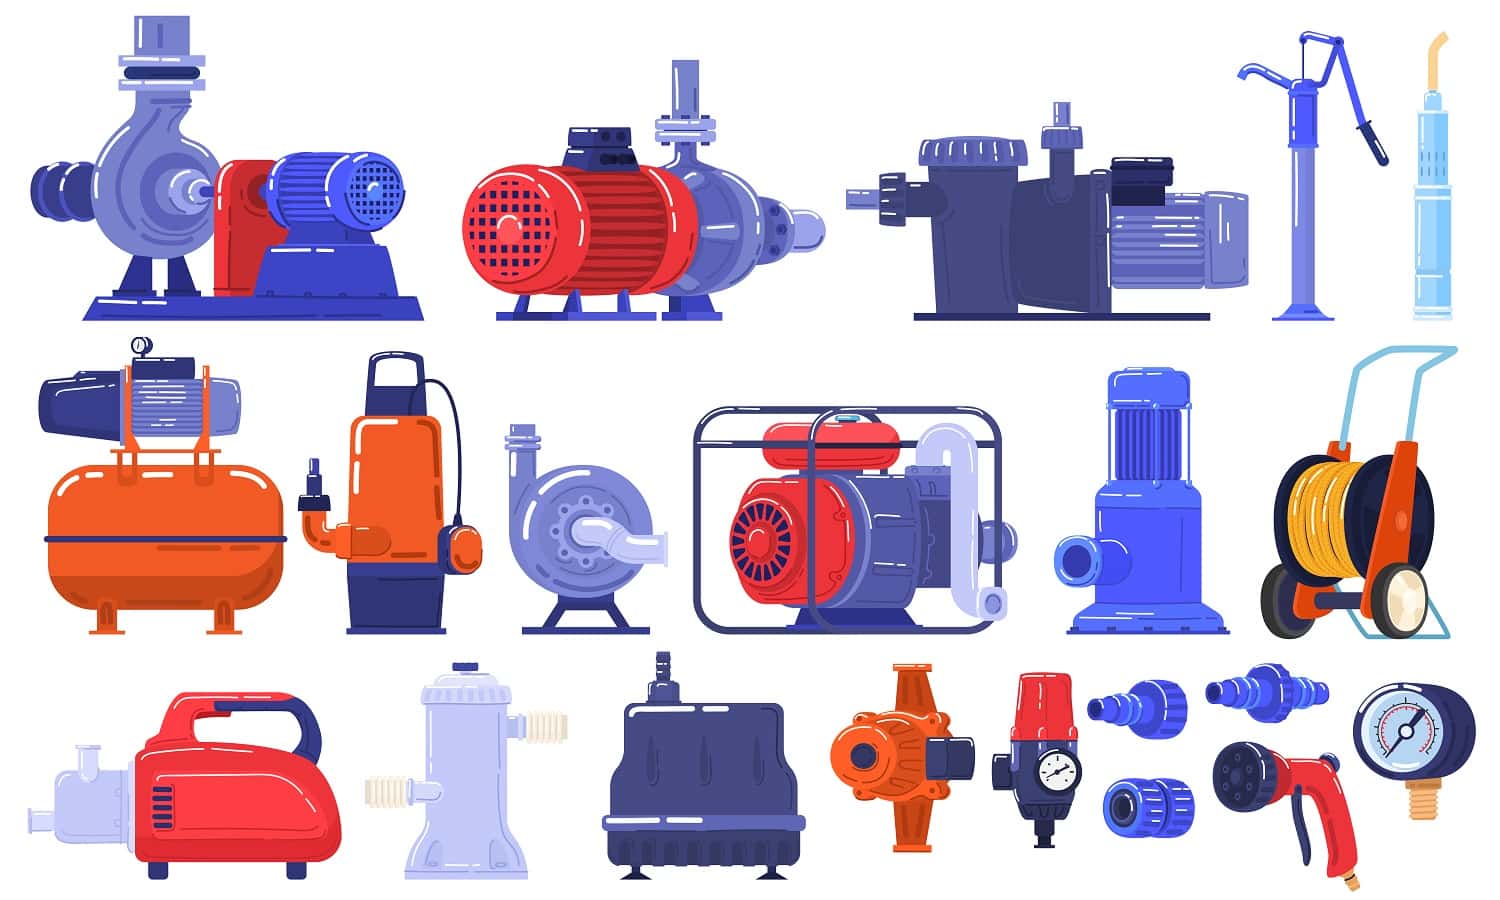 Pipe water pumps machinery, equipment, pipeline technology in industry, complex industrial machine of pipes, cables, motors, gauges and pumps set of isolated vector illustration. Engineering devices.